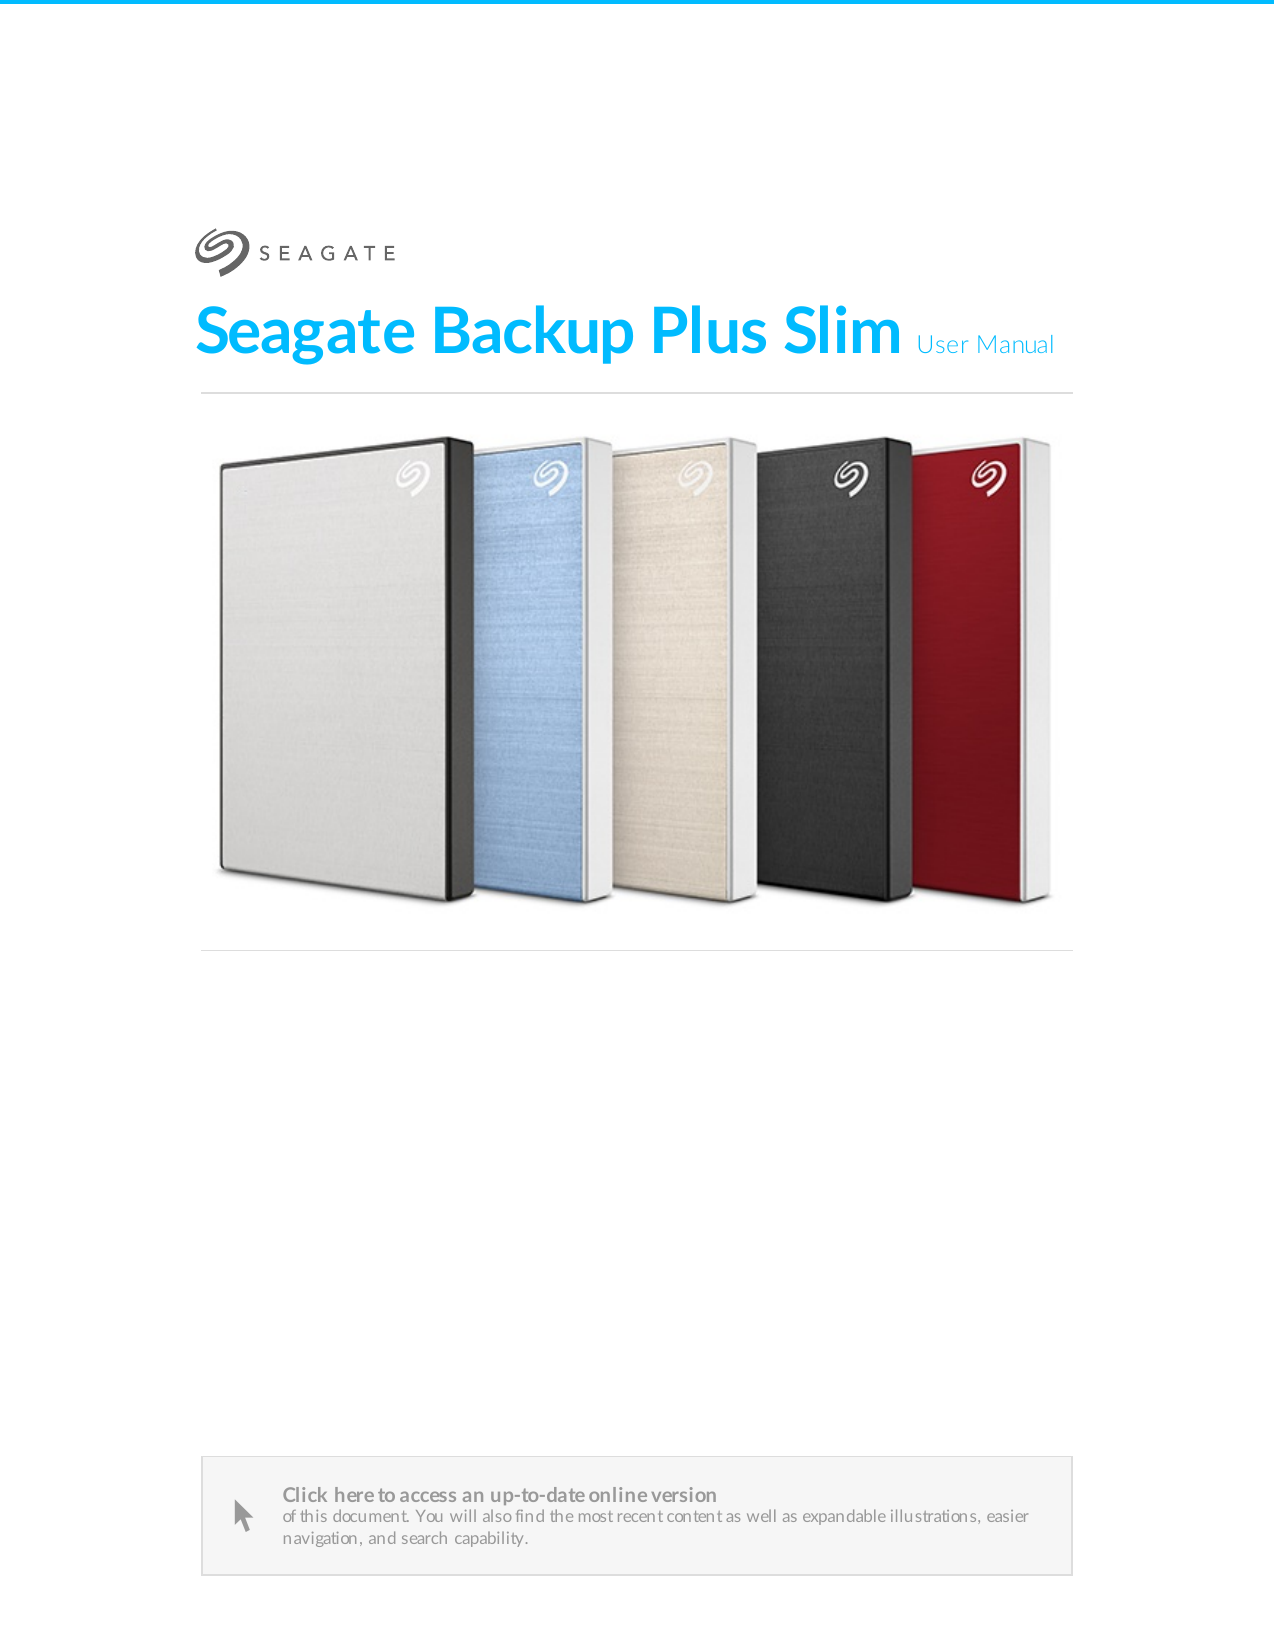 reformat seagate backup plus without wiping data